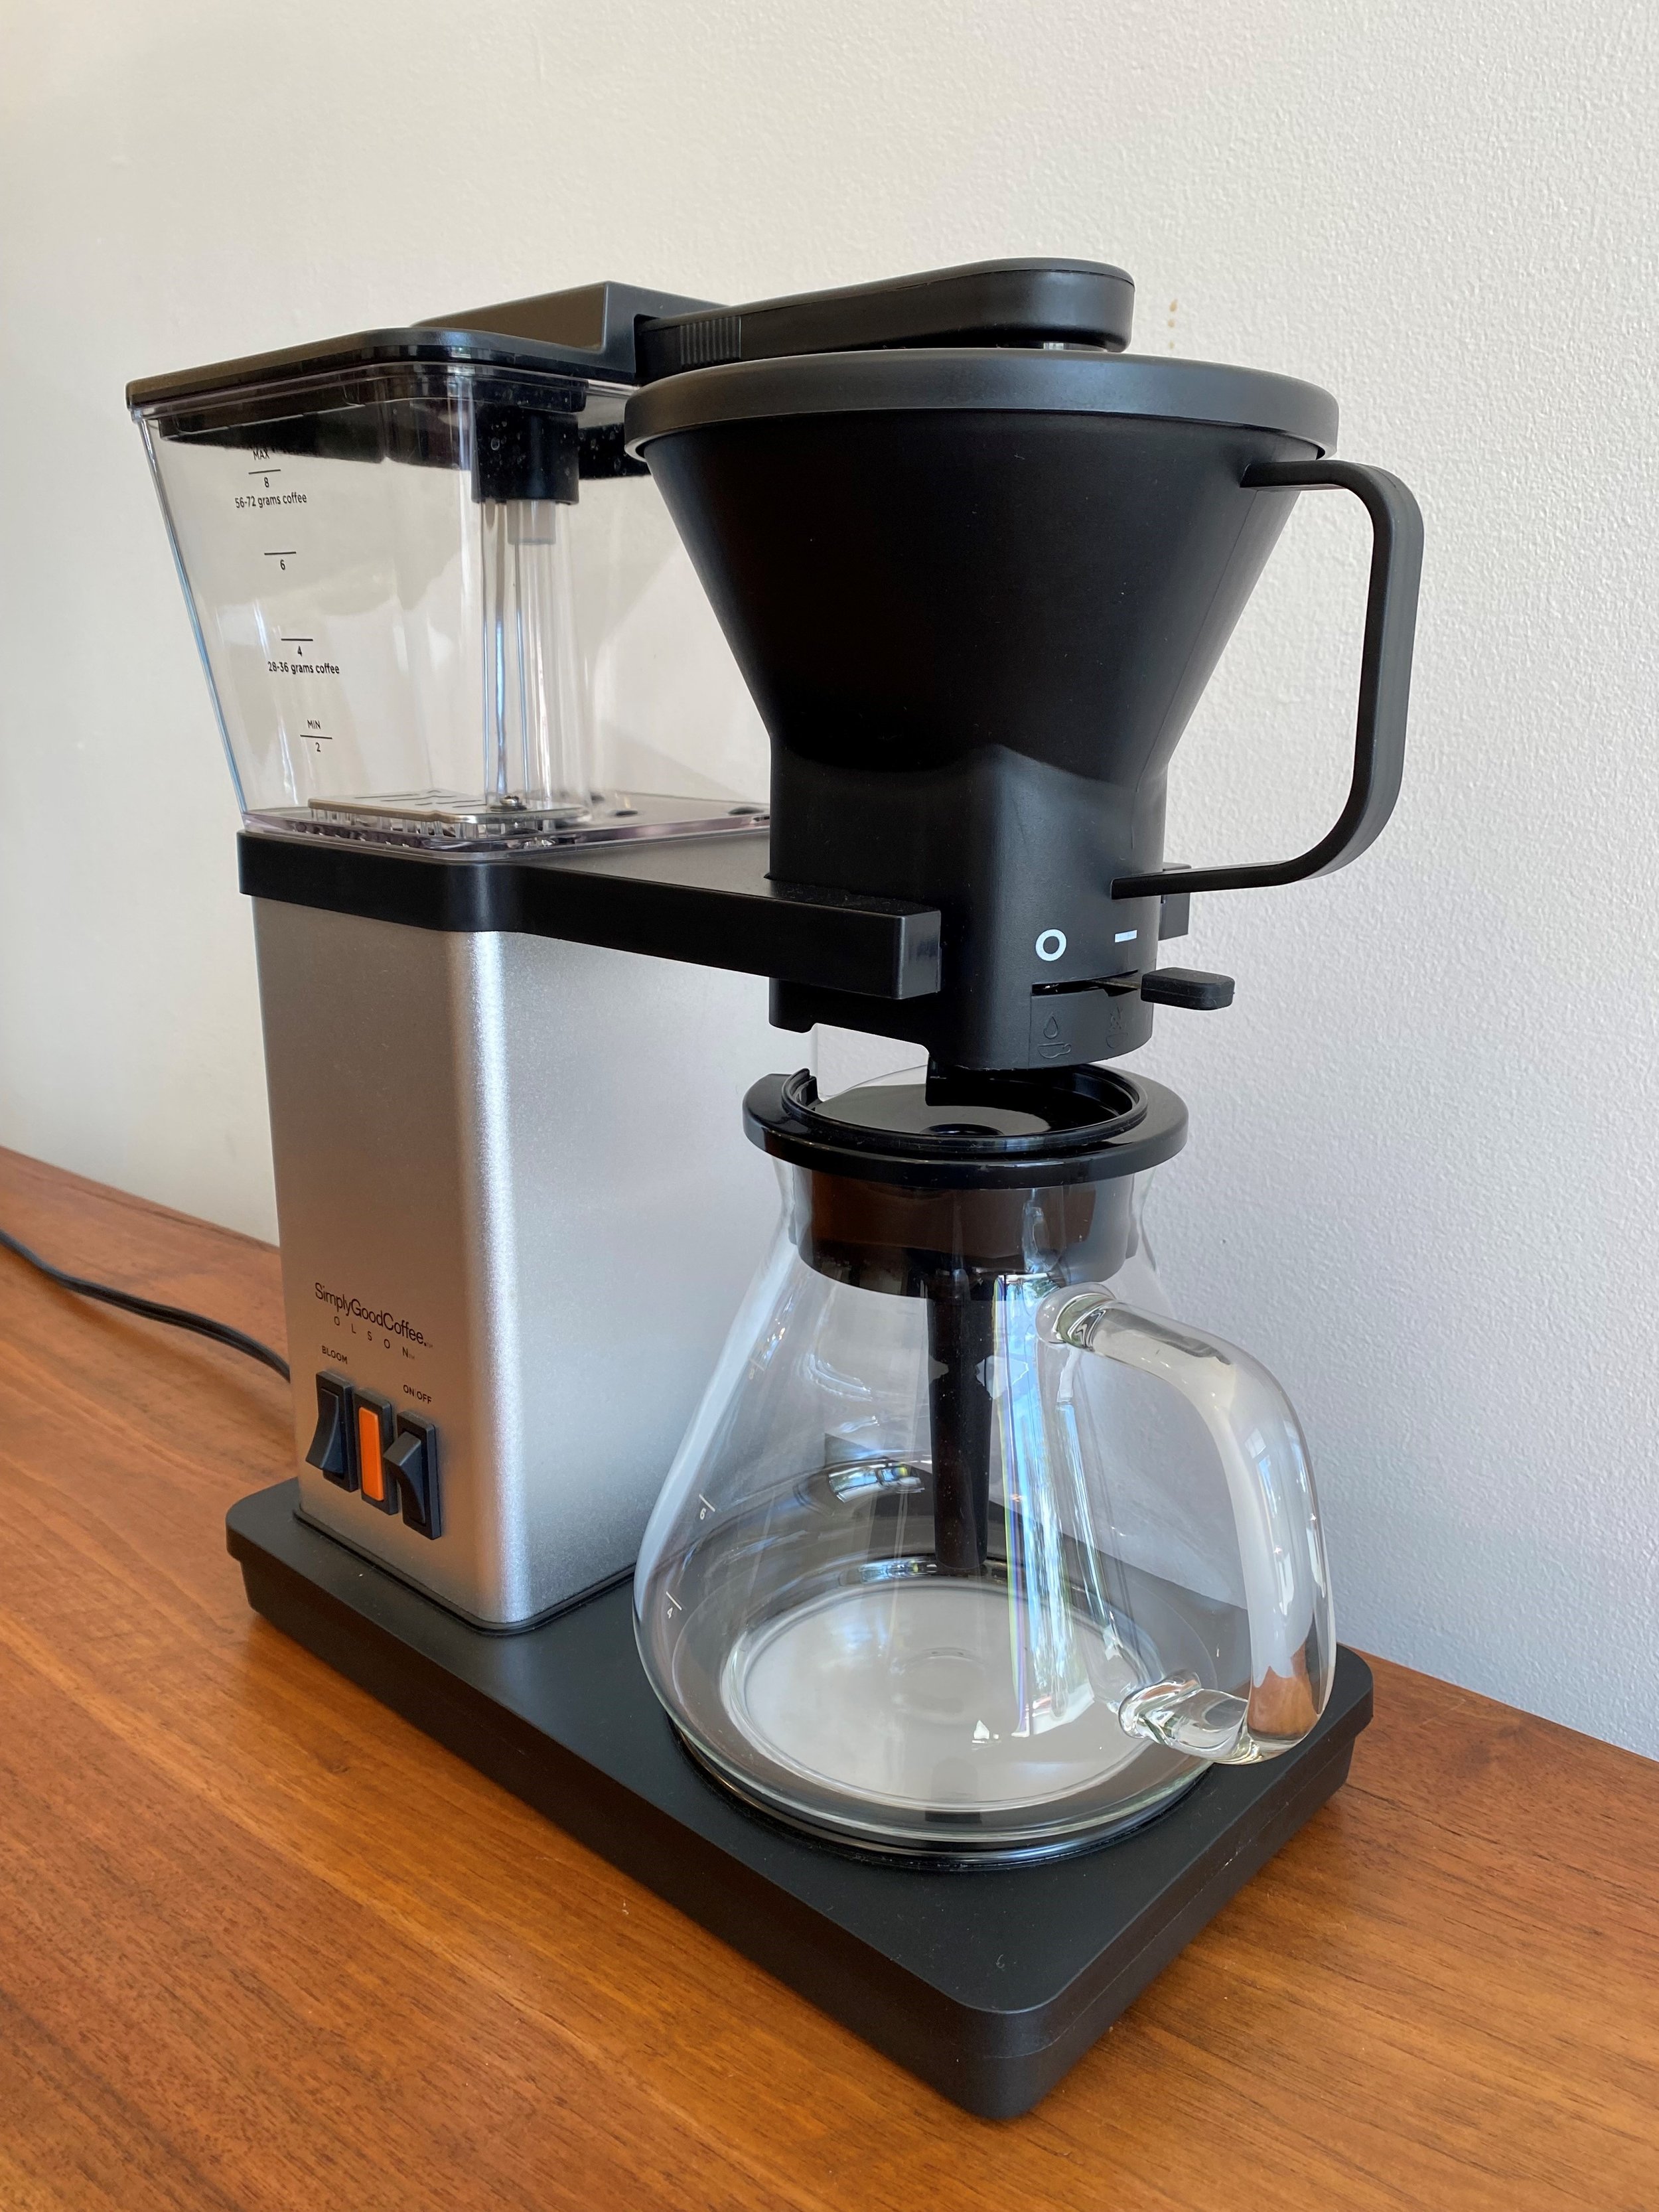 Coffee at Home: SimplyGoodCoffee Brewer is worth looking at